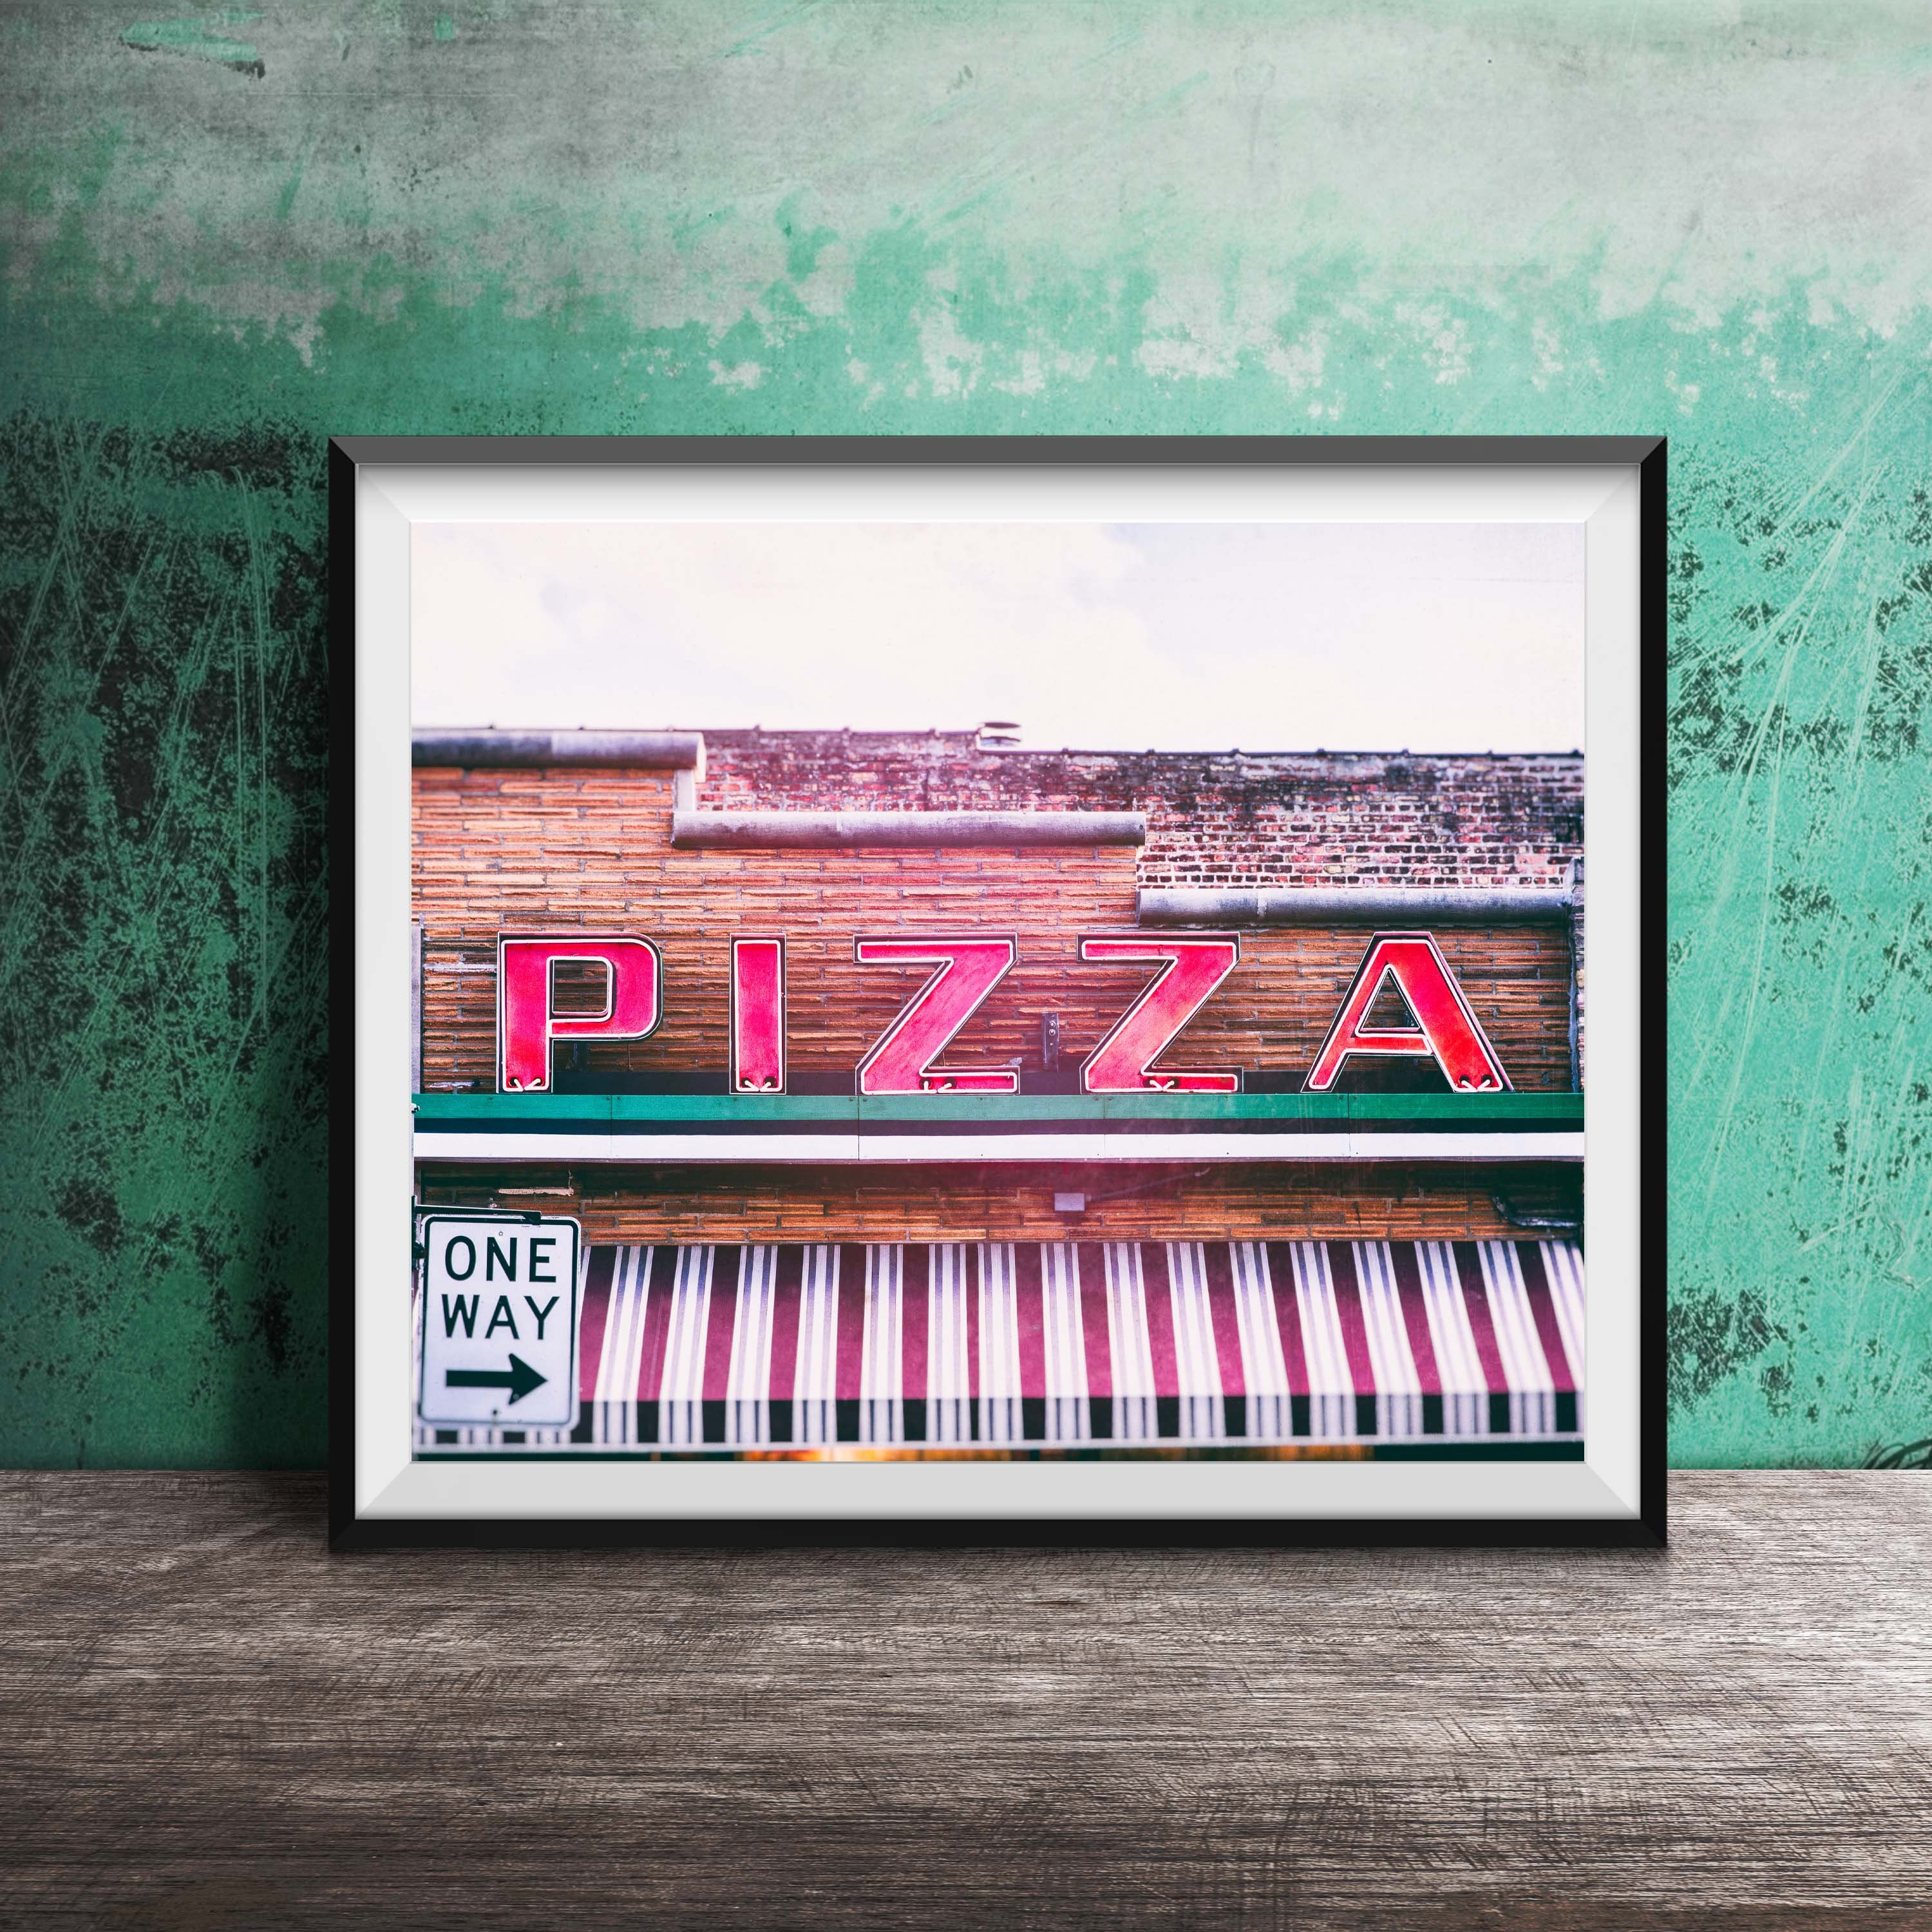 Retro Pizza Hot and Fresh Pizza Sign Restaurant Art Print by